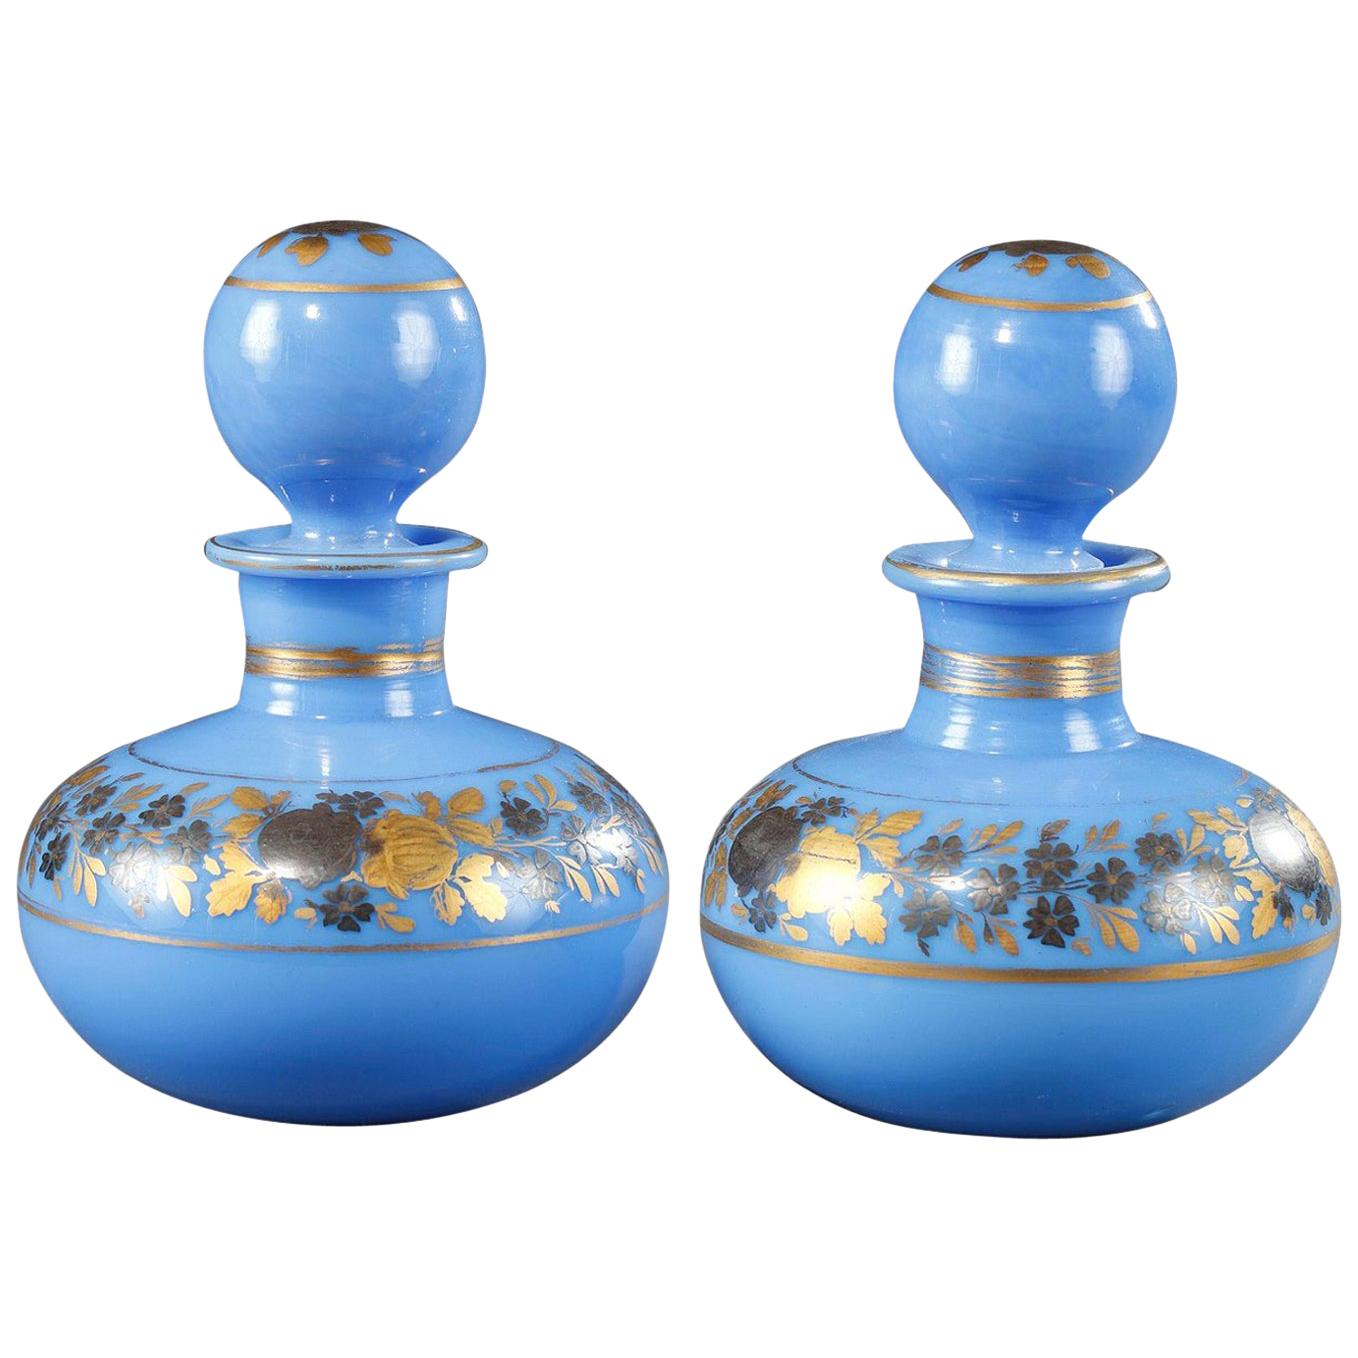 Pair of Blue Opaline Perfume Bottles Decorated by Desvignes